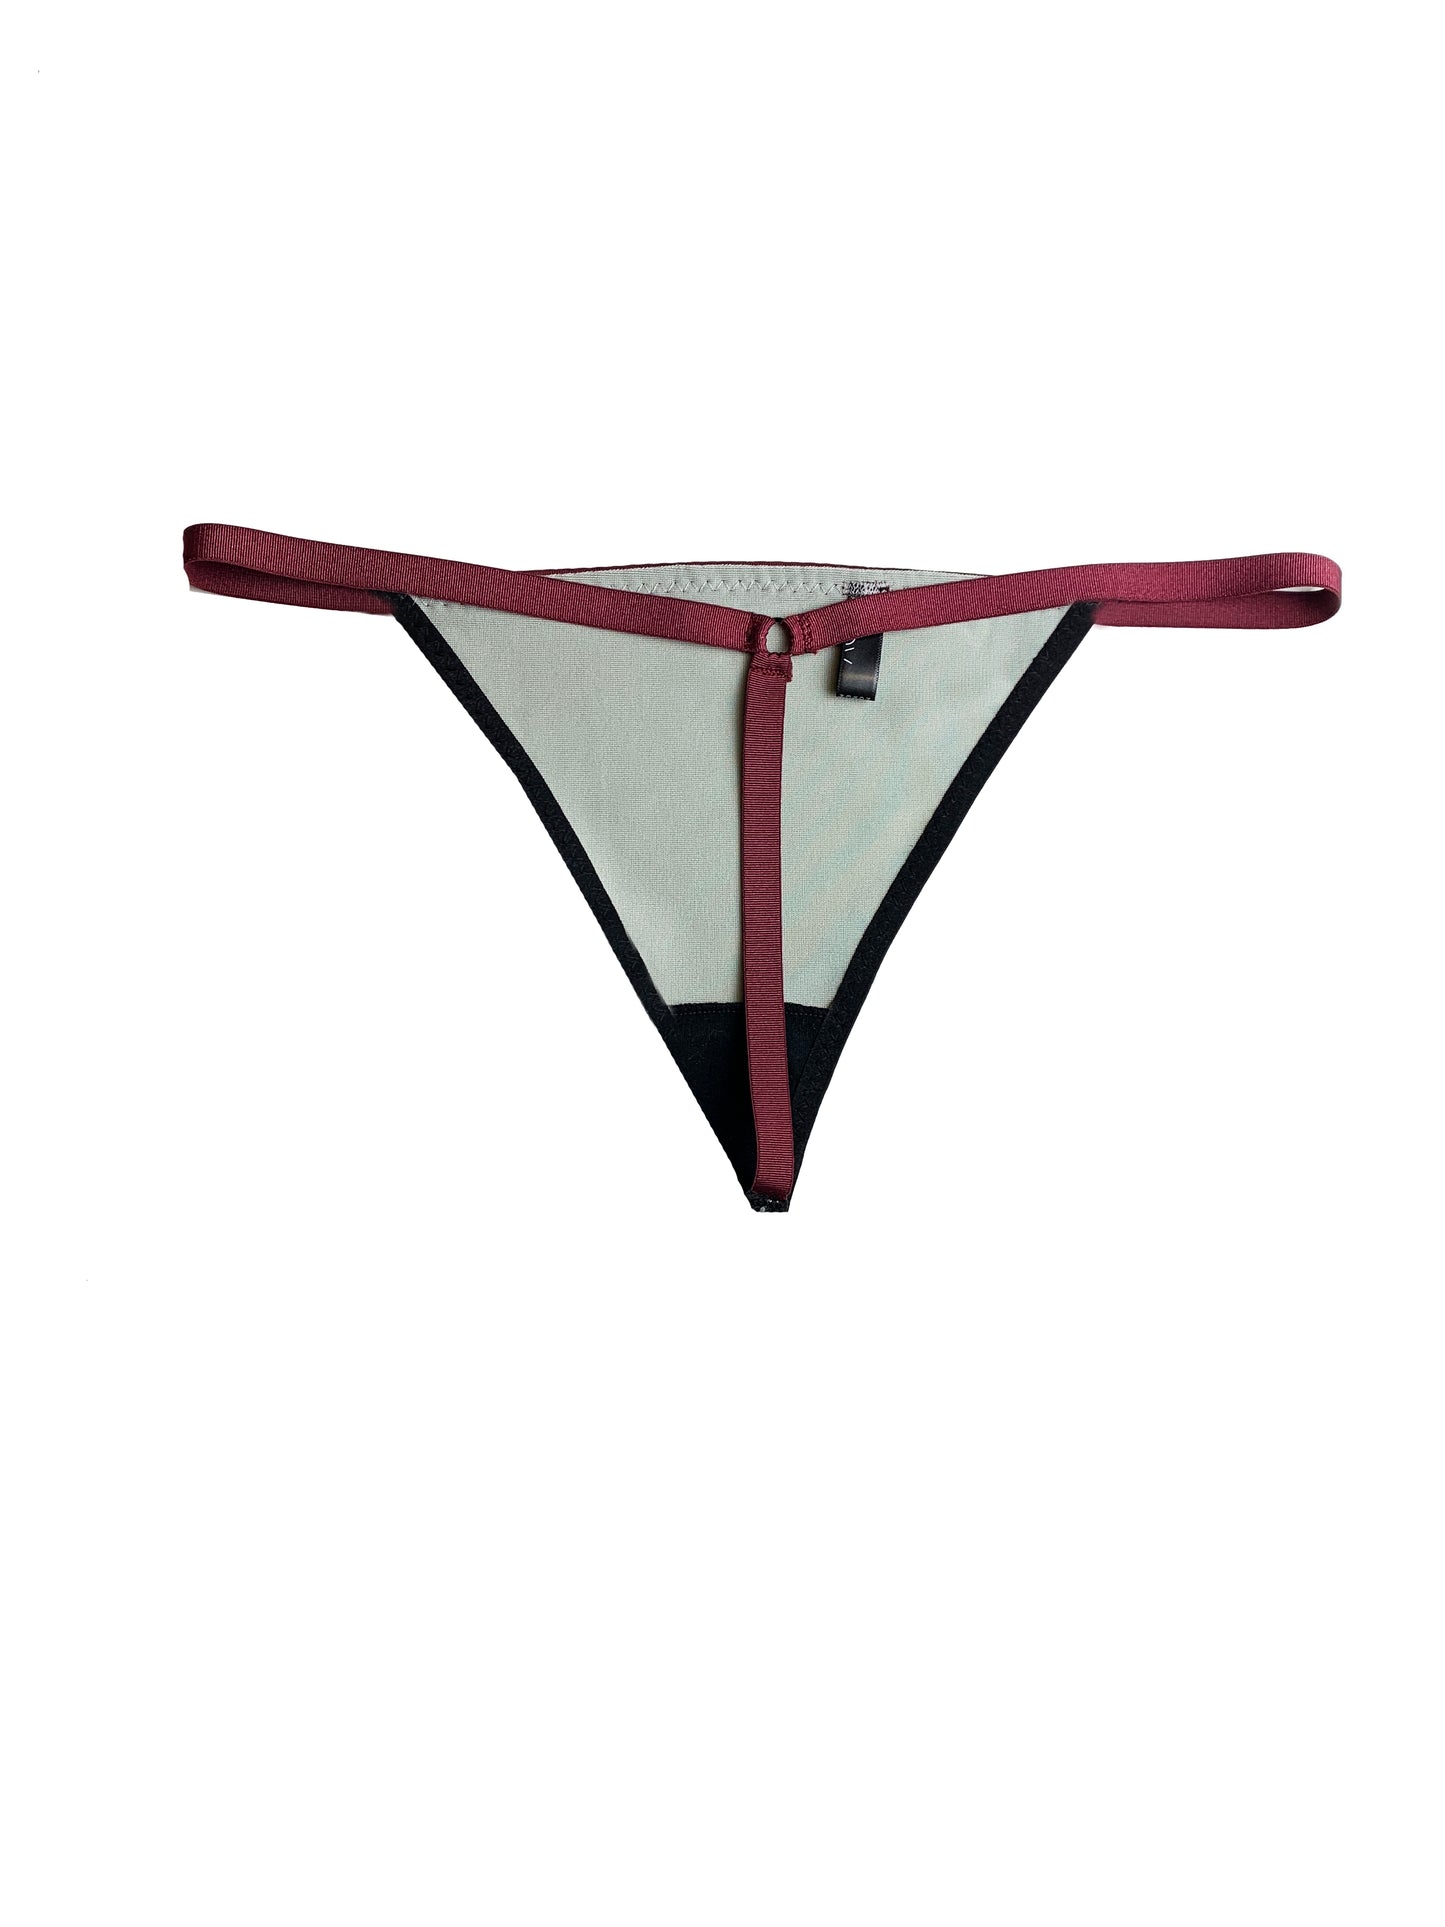 back of thong on white background